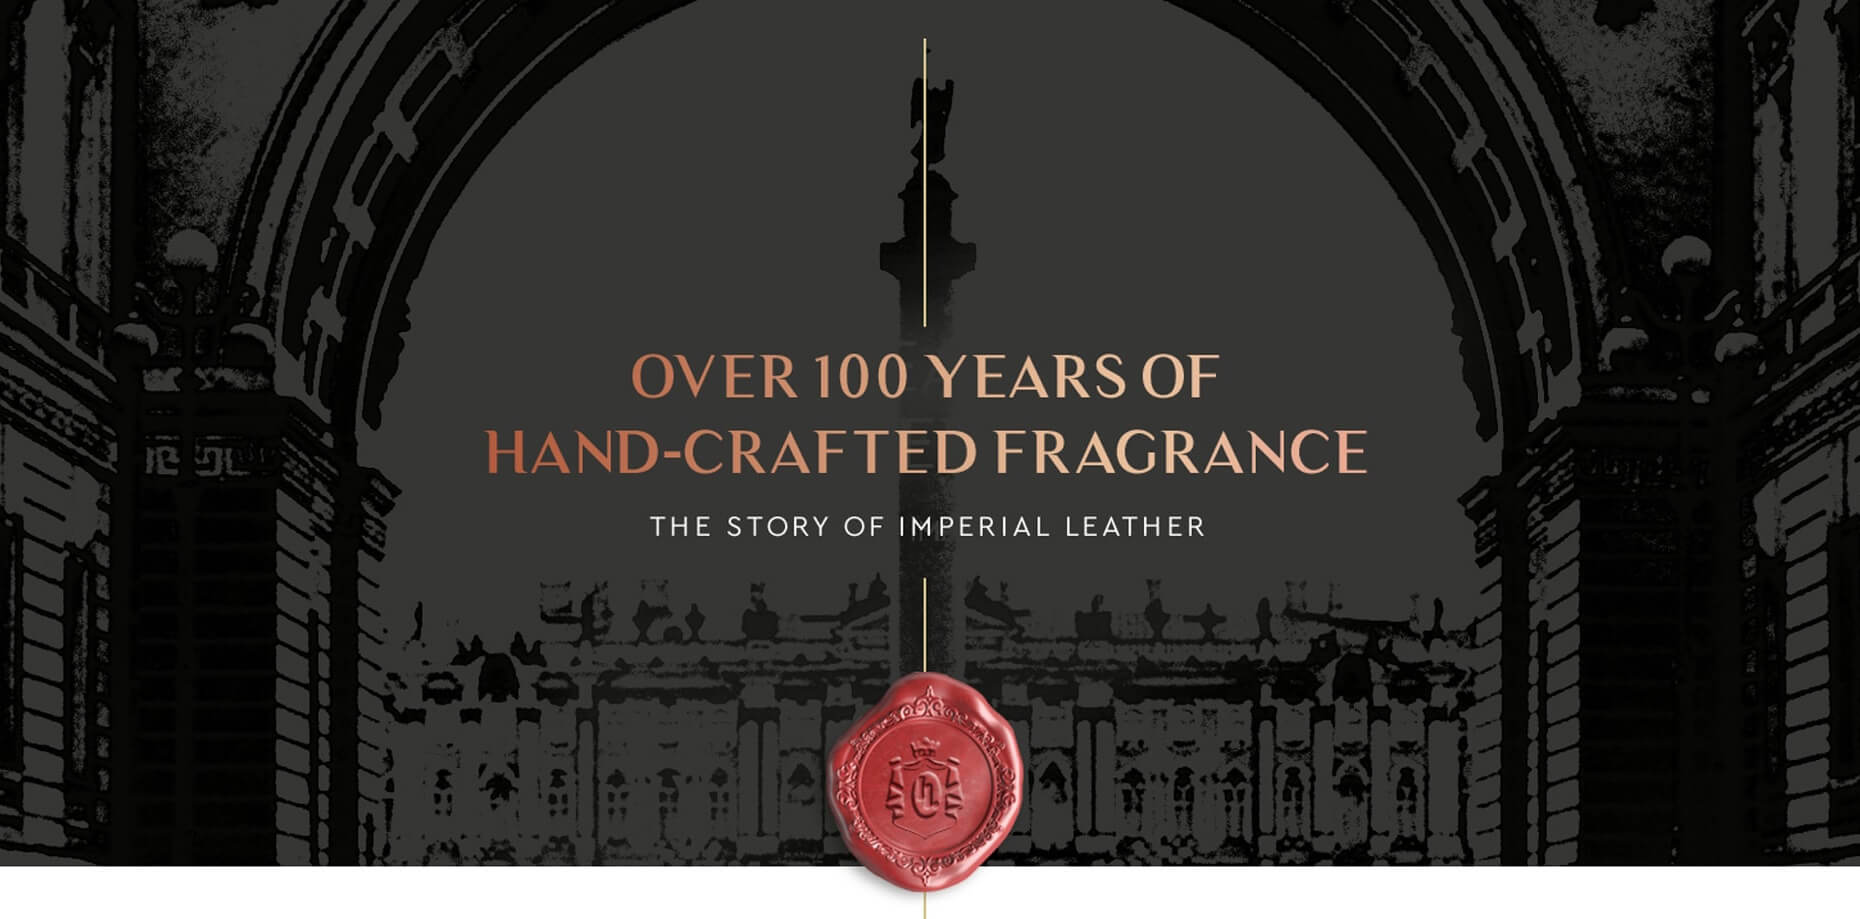 Over 100 Years of Hand-Crafted Fragrance - The Story of Imperial Leather